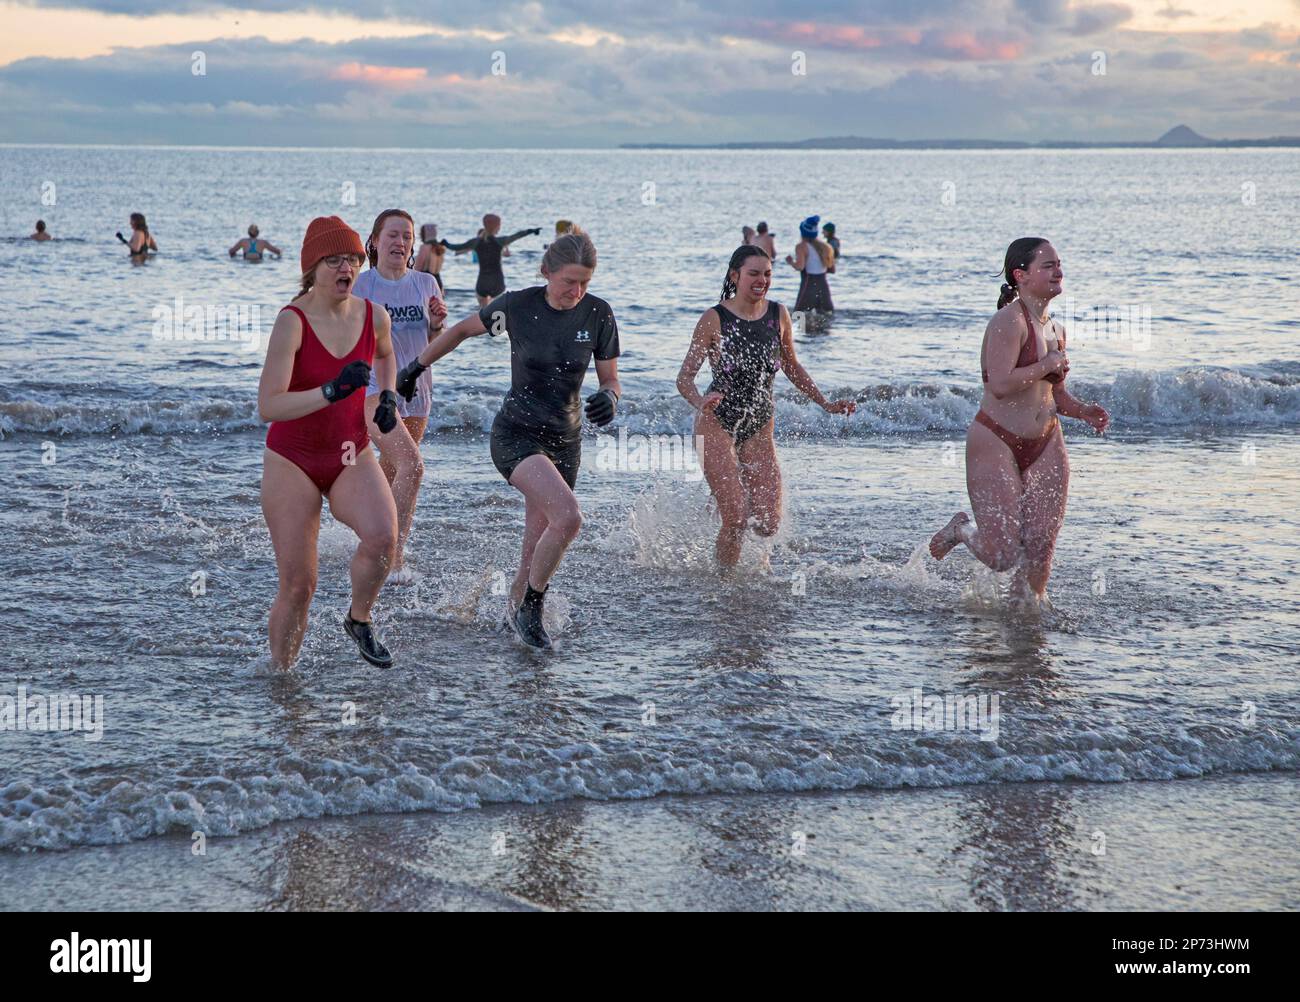 Portobello, Edinburgh, Scotland, UK. 8th March 2023. International Women’s Day swimrise dip 2023 carried on in minus 5 degree temperatures. Due to the extreme cold weather forecast and with advice from members of the RNLI safety team, organisers made the difficult decision to cancel the International Women’s Day swimrise dip 2023 was made yesterday however hundreds turned up at the beach. Credit: Archwhite/alamy live news. Stock Photo